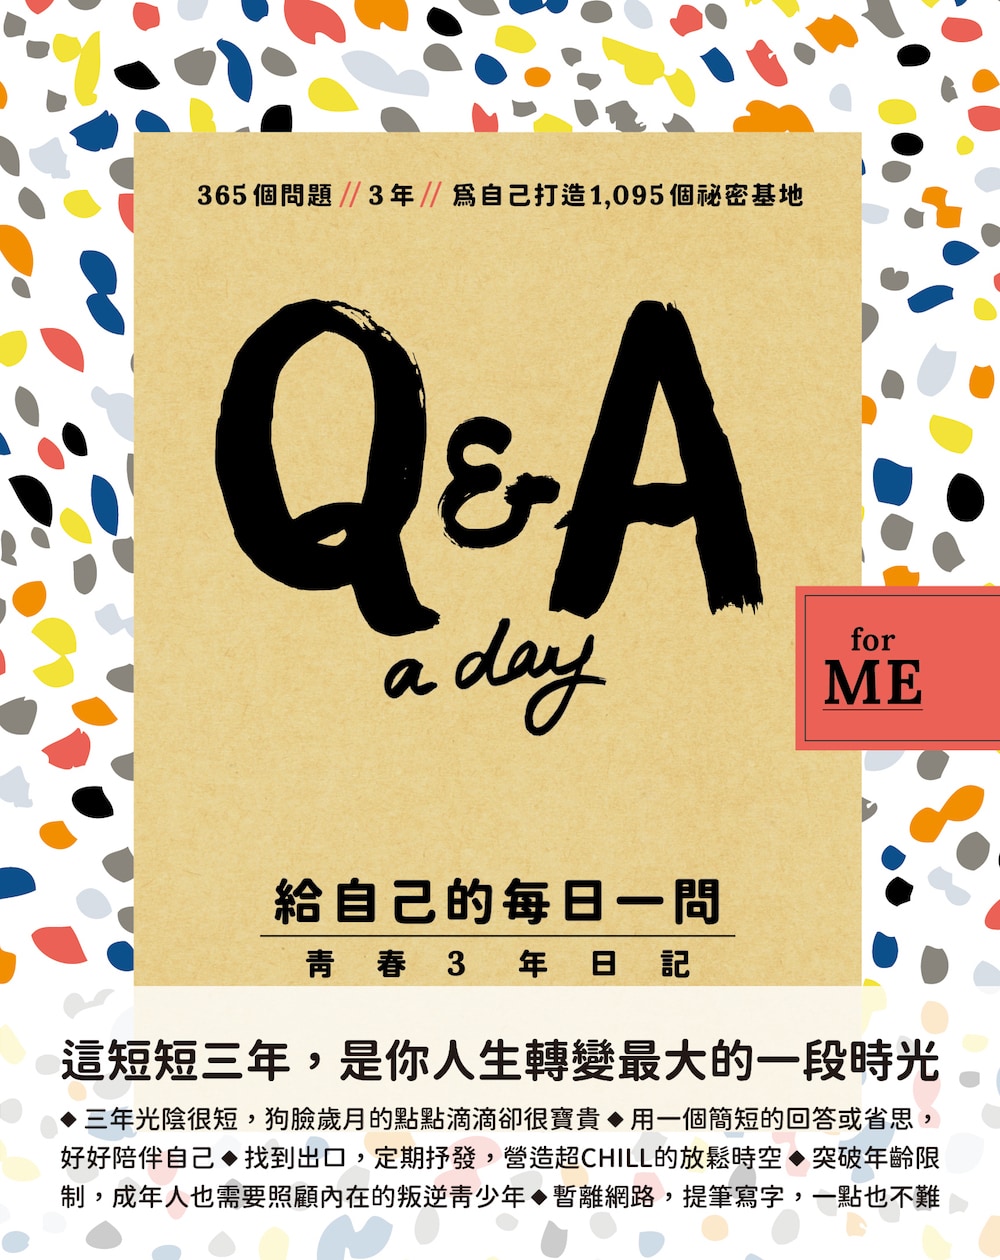 【Q&A a Day for Me】給自己的每日一問：青春3年日記 